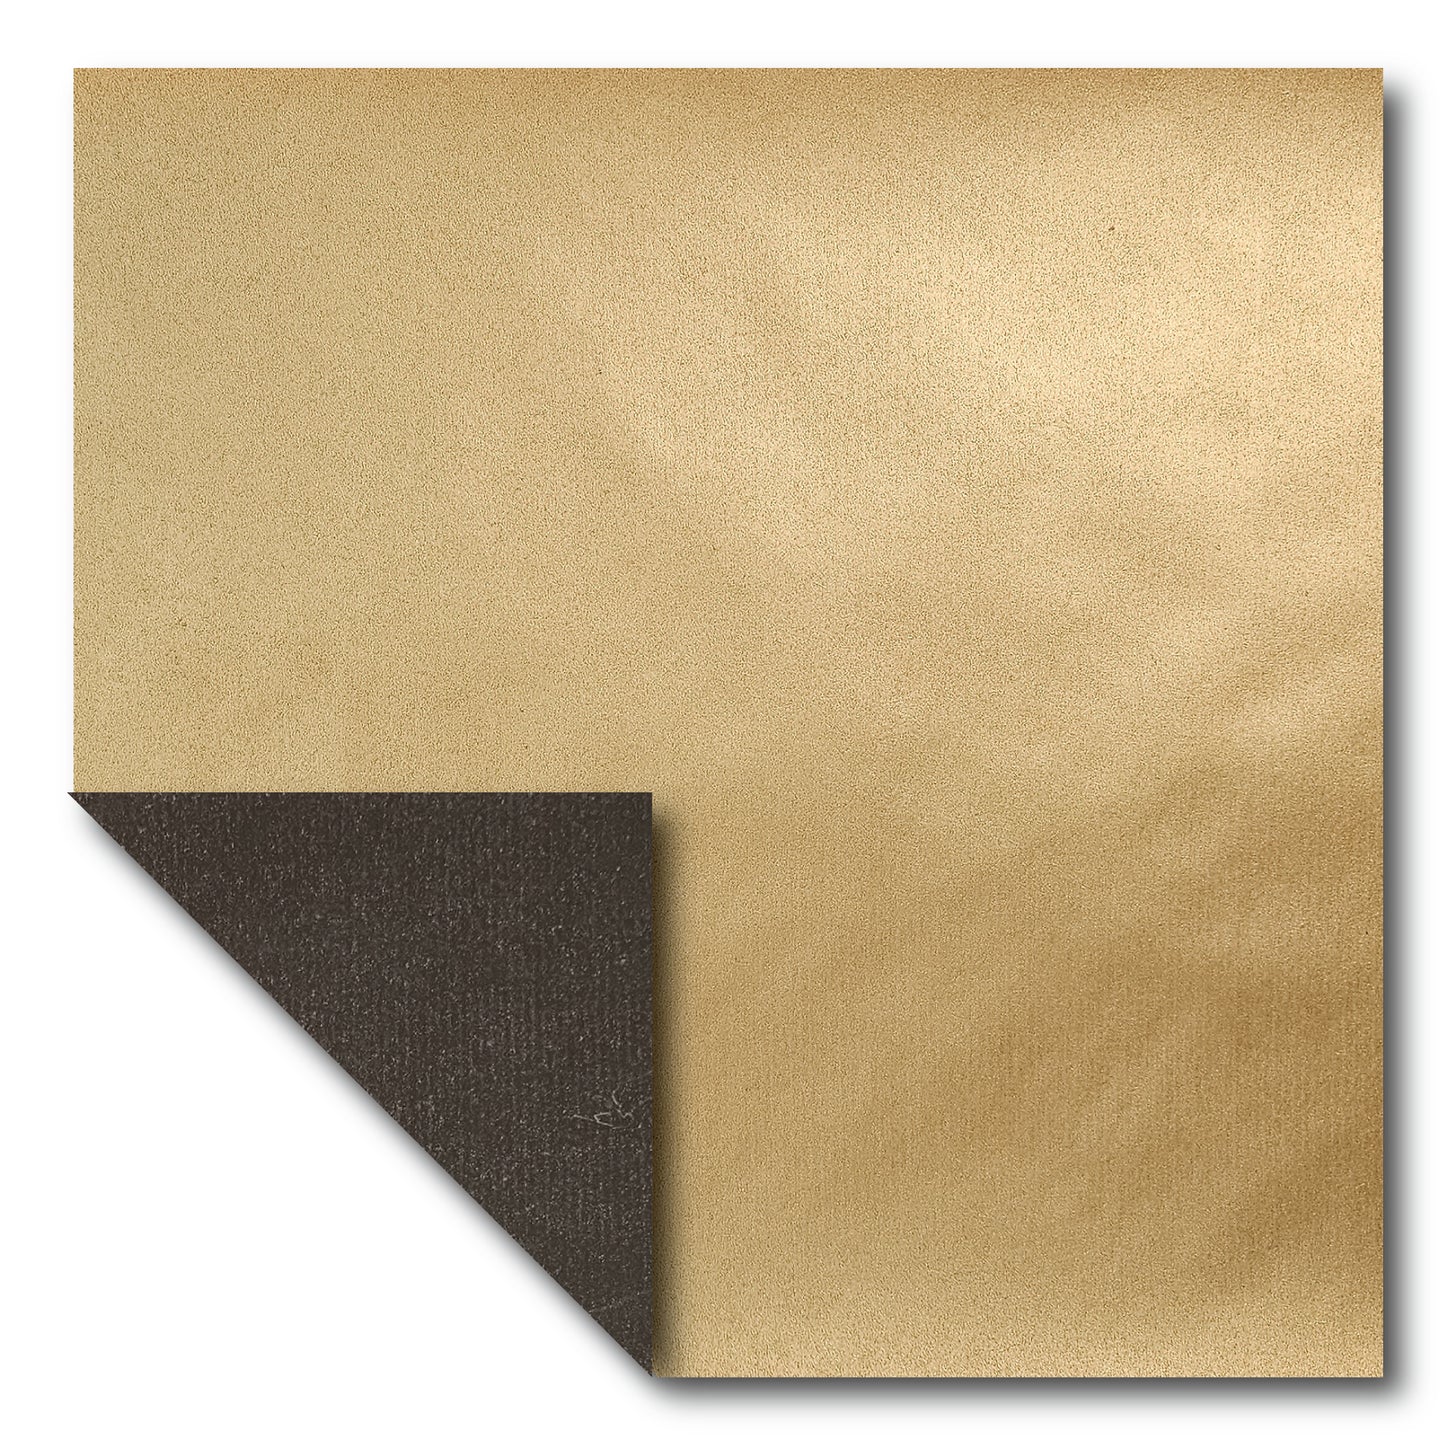 [Taro's Origami Studio] Duo Jumbo Gold/Black (Different Colors On Each Side) Double Sided Jumbo 1３.5 Inch (35 cm) Kami Paper with Color Change Patterns, 10 Sheets